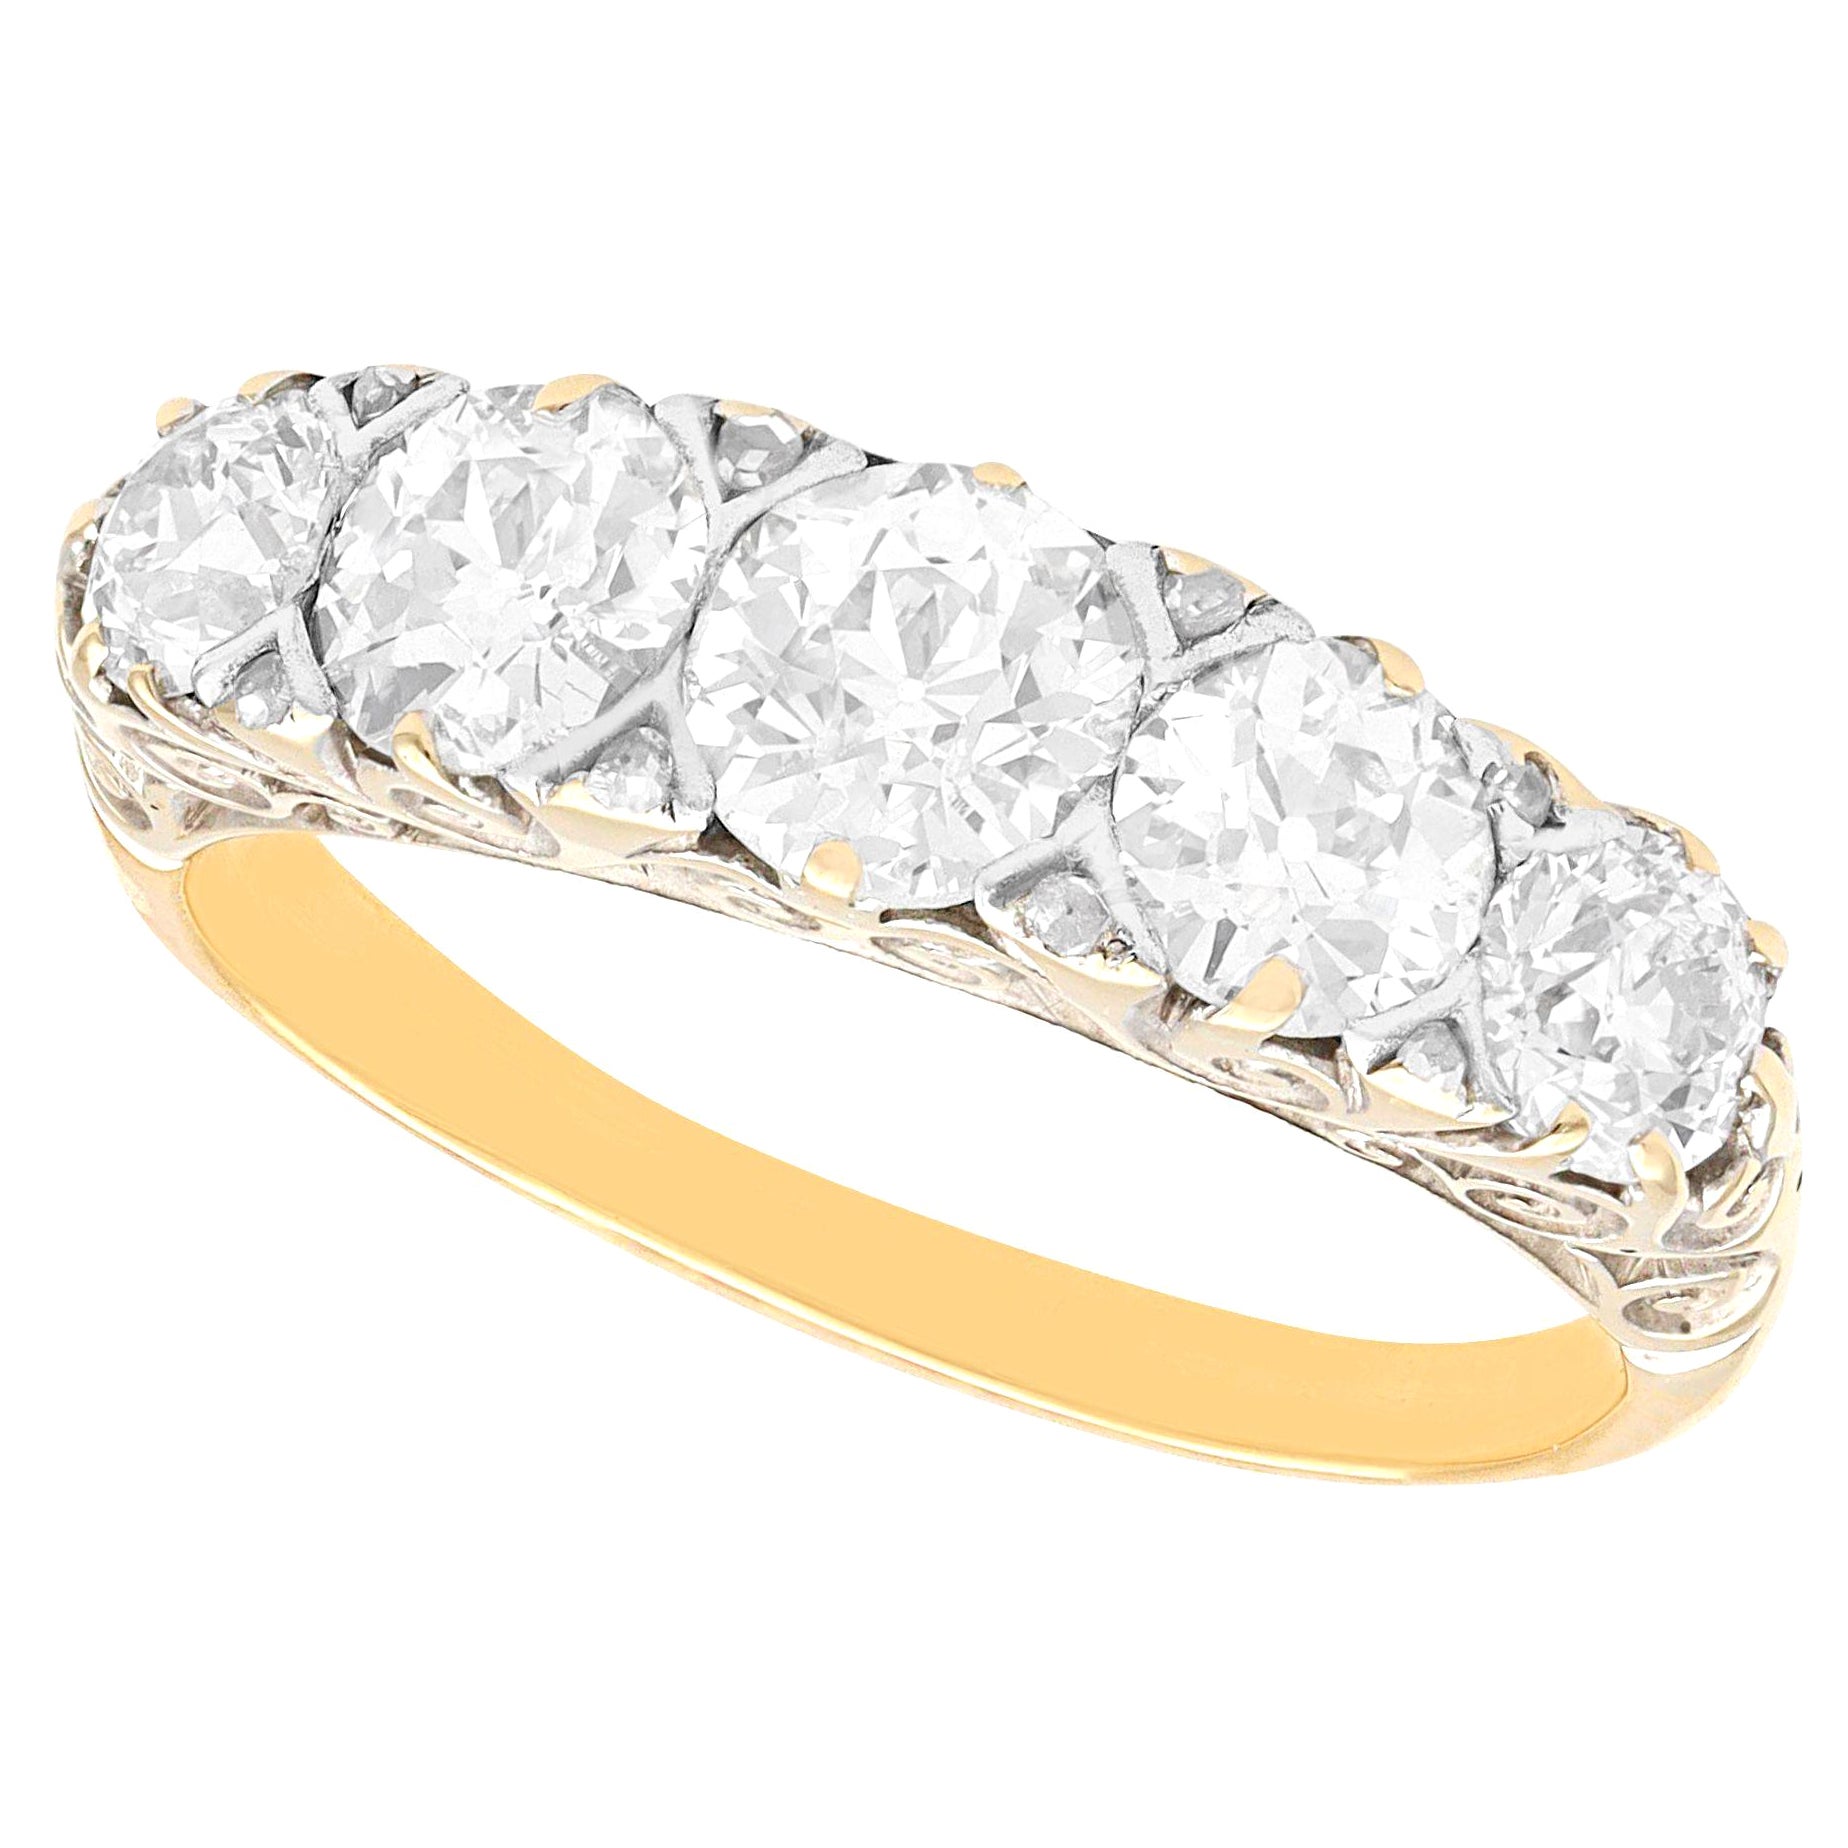 Antique 2.52 Carat Diamond and 15k Yellow Gold Five Stone Ring